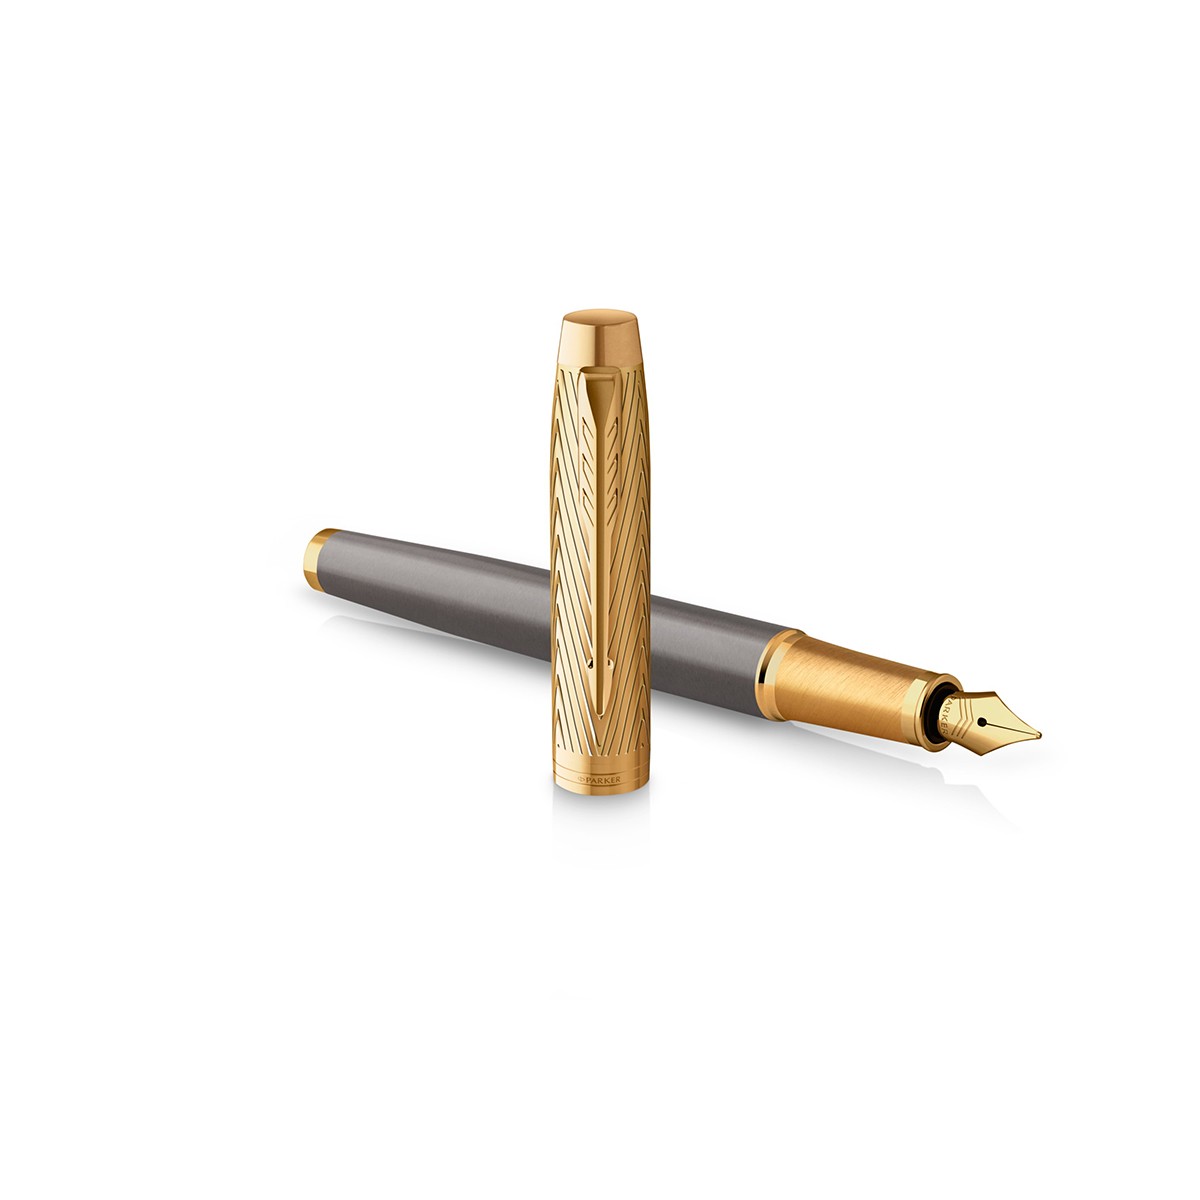 Parker I.M. Pioneers Collection Arrow GT Πένα M